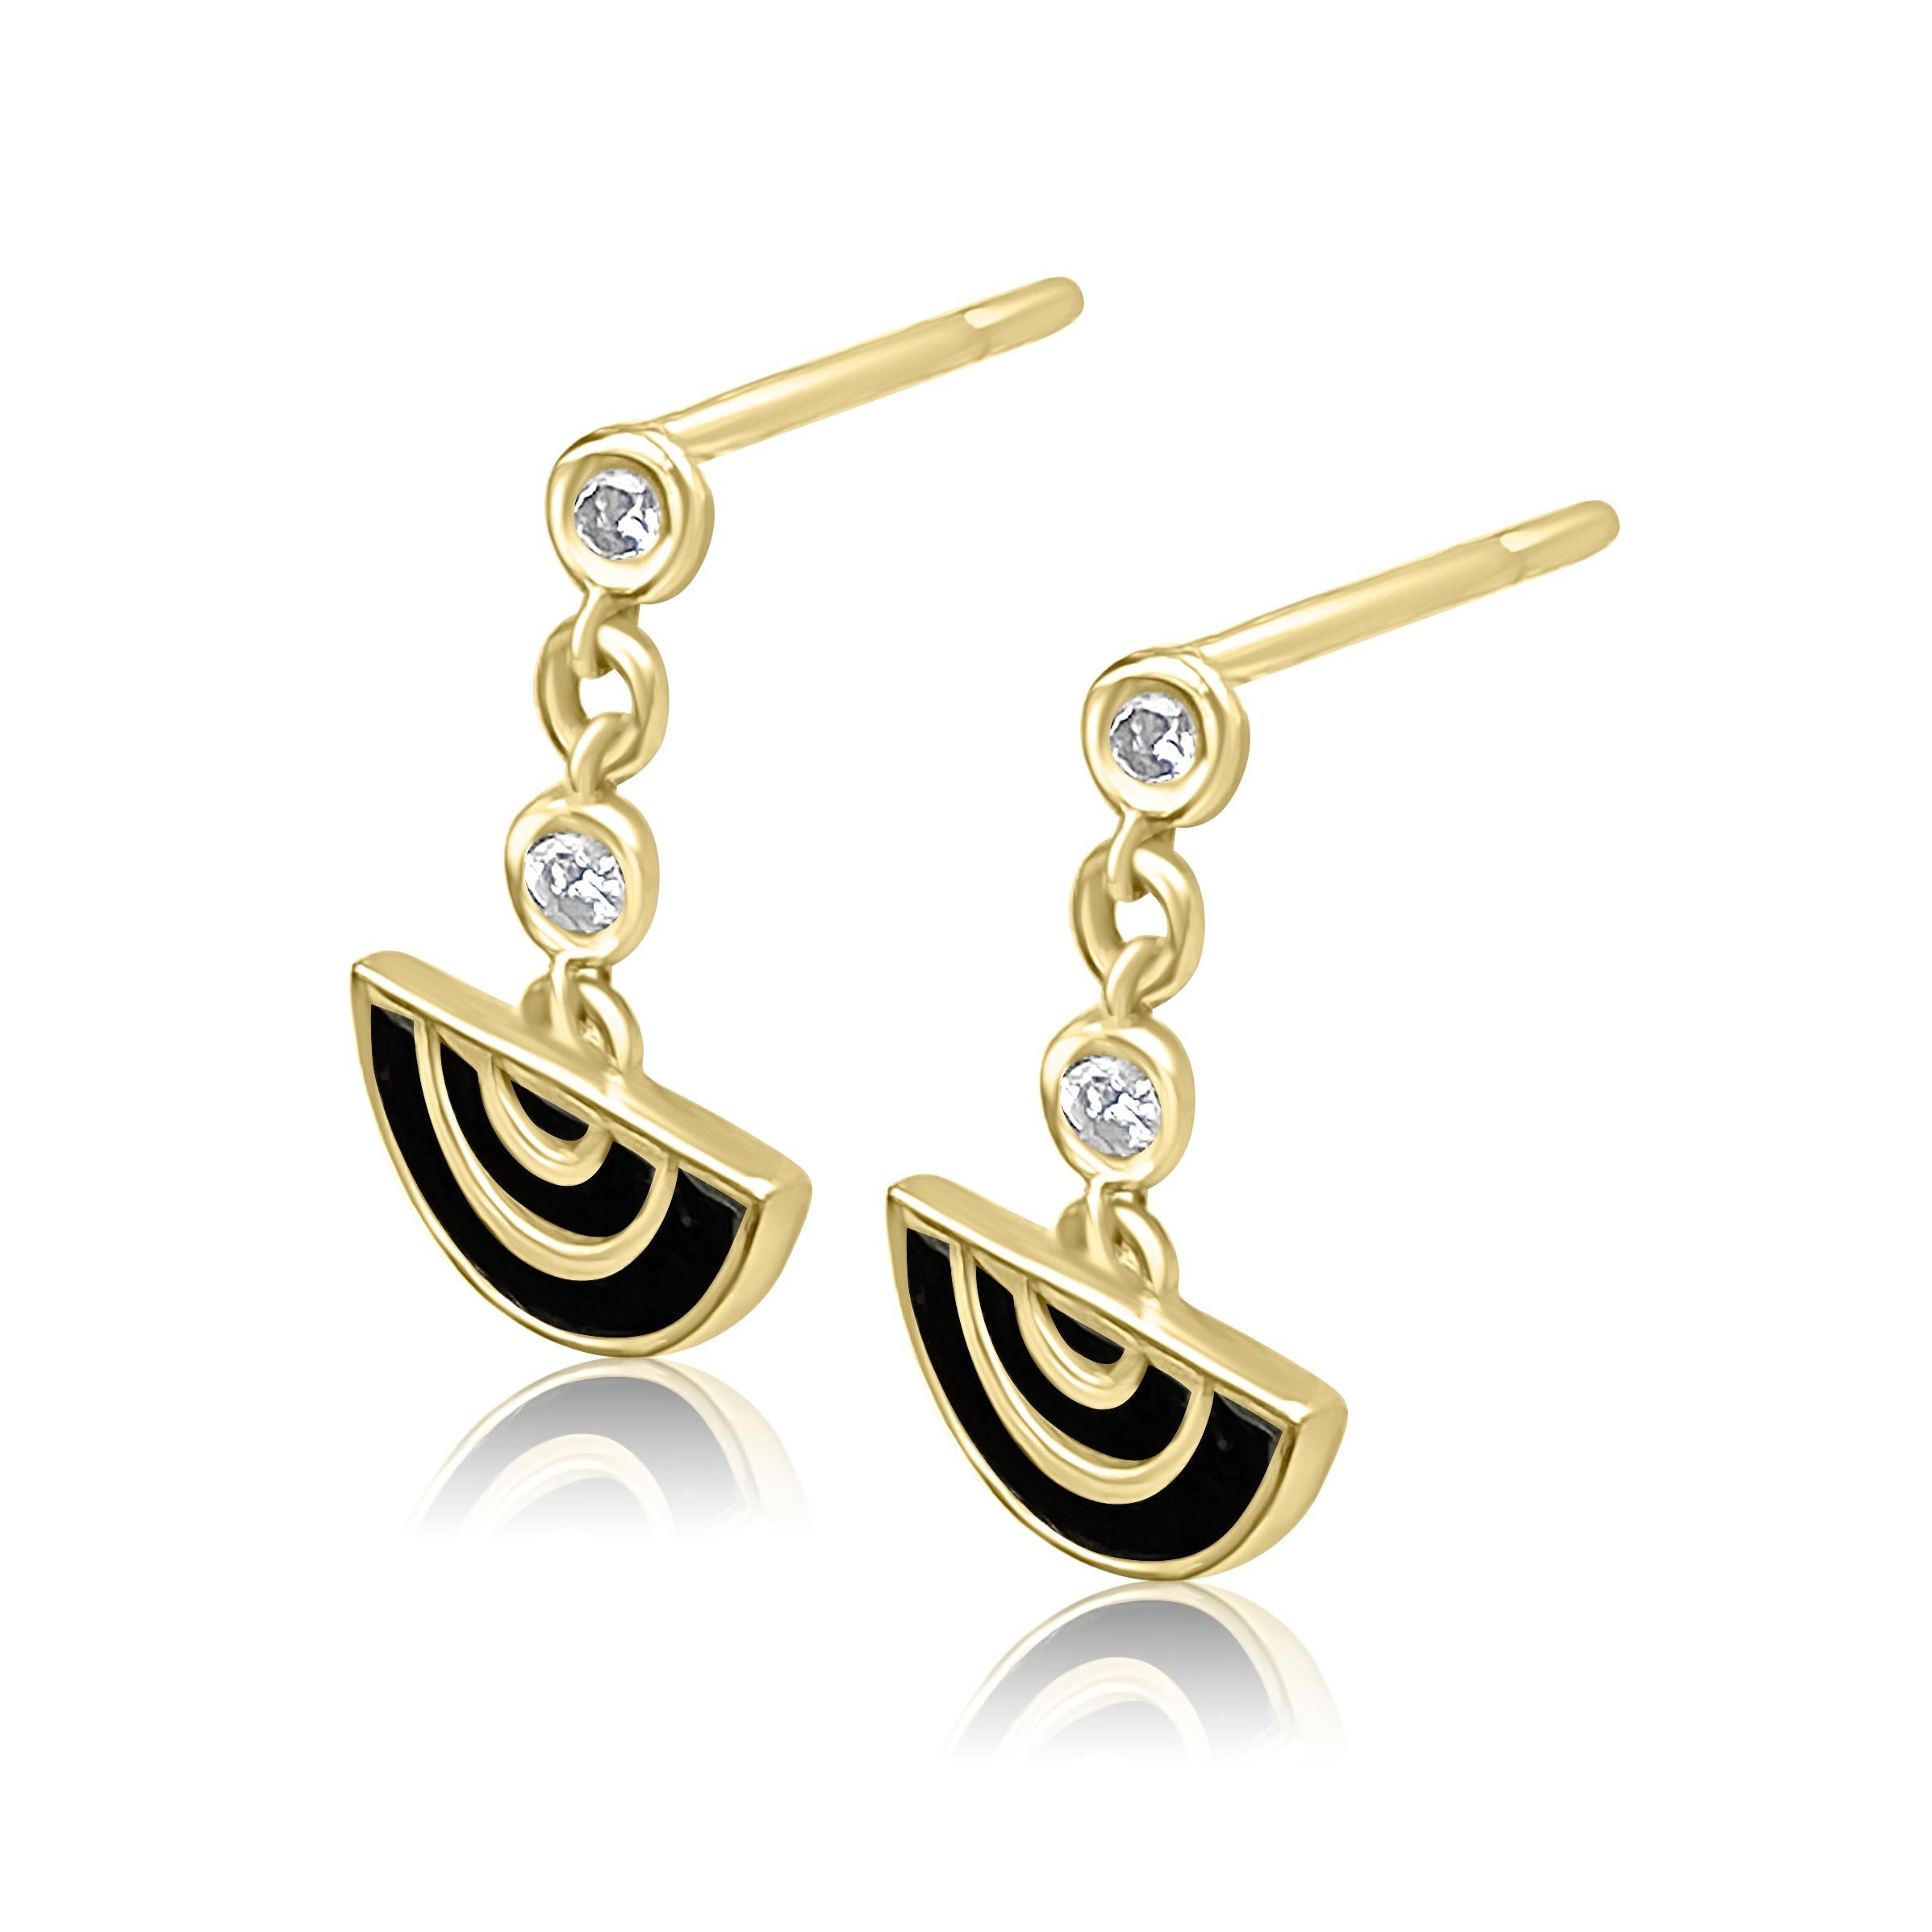 Part of the New Vintage collection, these earrings are the perfect match for the modern woman: luxurious, distinctive, and versatile.

Handcrafted from 14 karat solid yellow gold, these half-moon earrings feature concentric semi circles finished